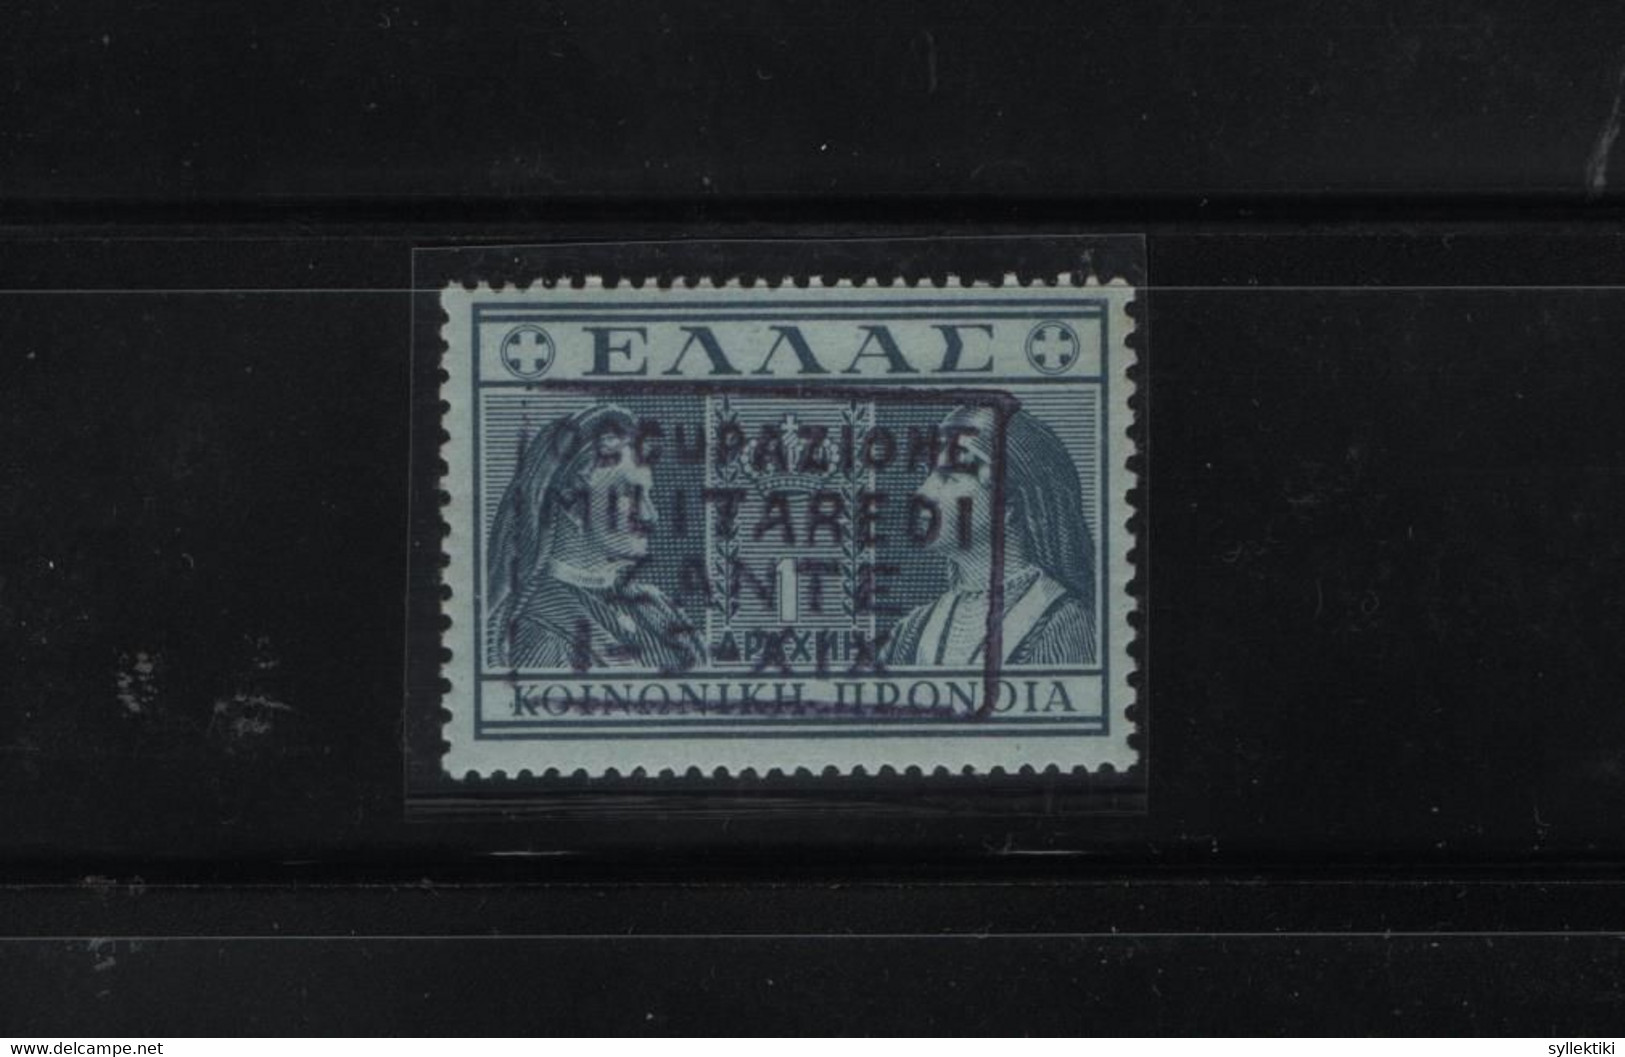 GREECE 1941 ZANTE OVERPRINT ON CHARITY ISSUE 1 DRACHMA MNH STAMP     HELLAS No 306 AND VALUE  EURO 900.00++ - Isole Ioniche